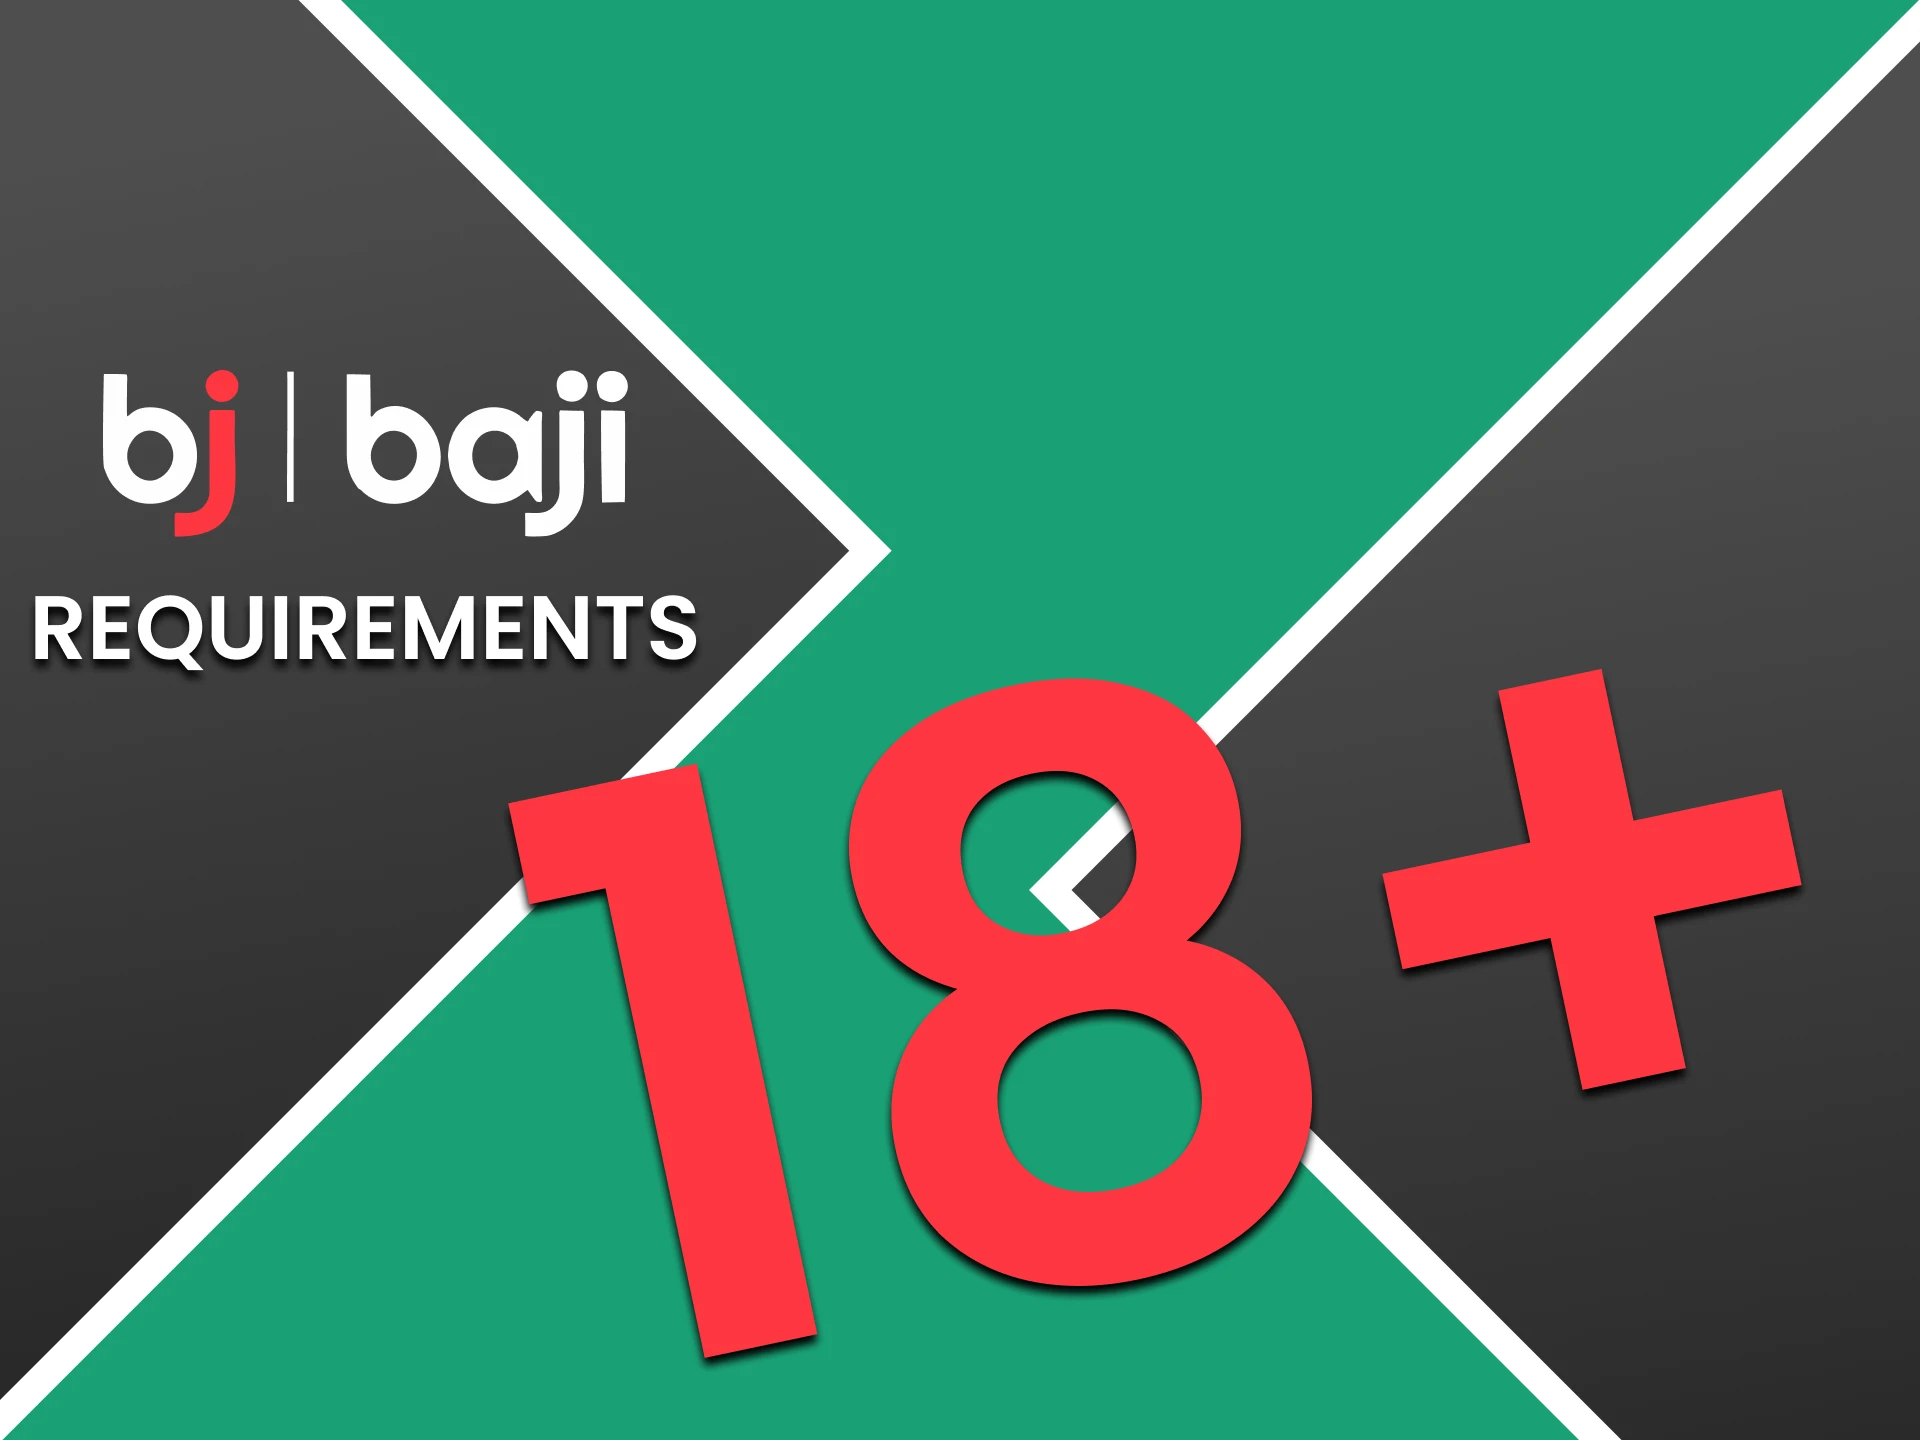 We will tell you about the requirements for registering on the Baji website.